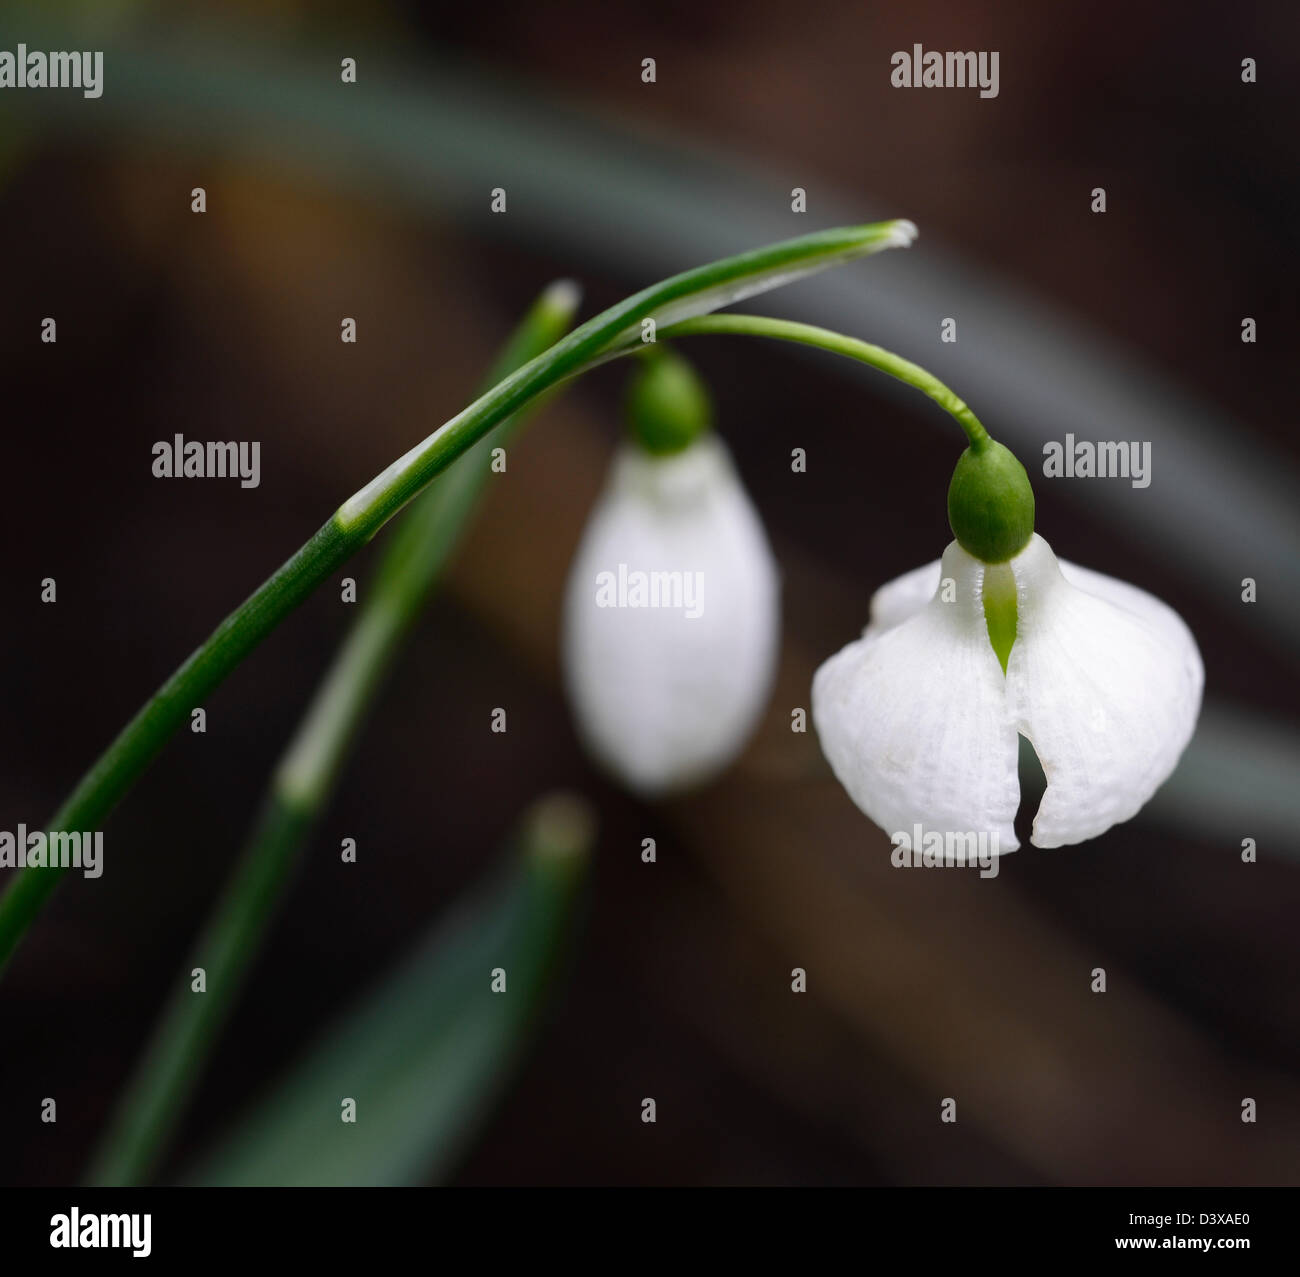 galanthus plicatus diggory snowdrop snowdrops winter closeup plant portraits white green markings flowers blooms bloom spring Stock Photo